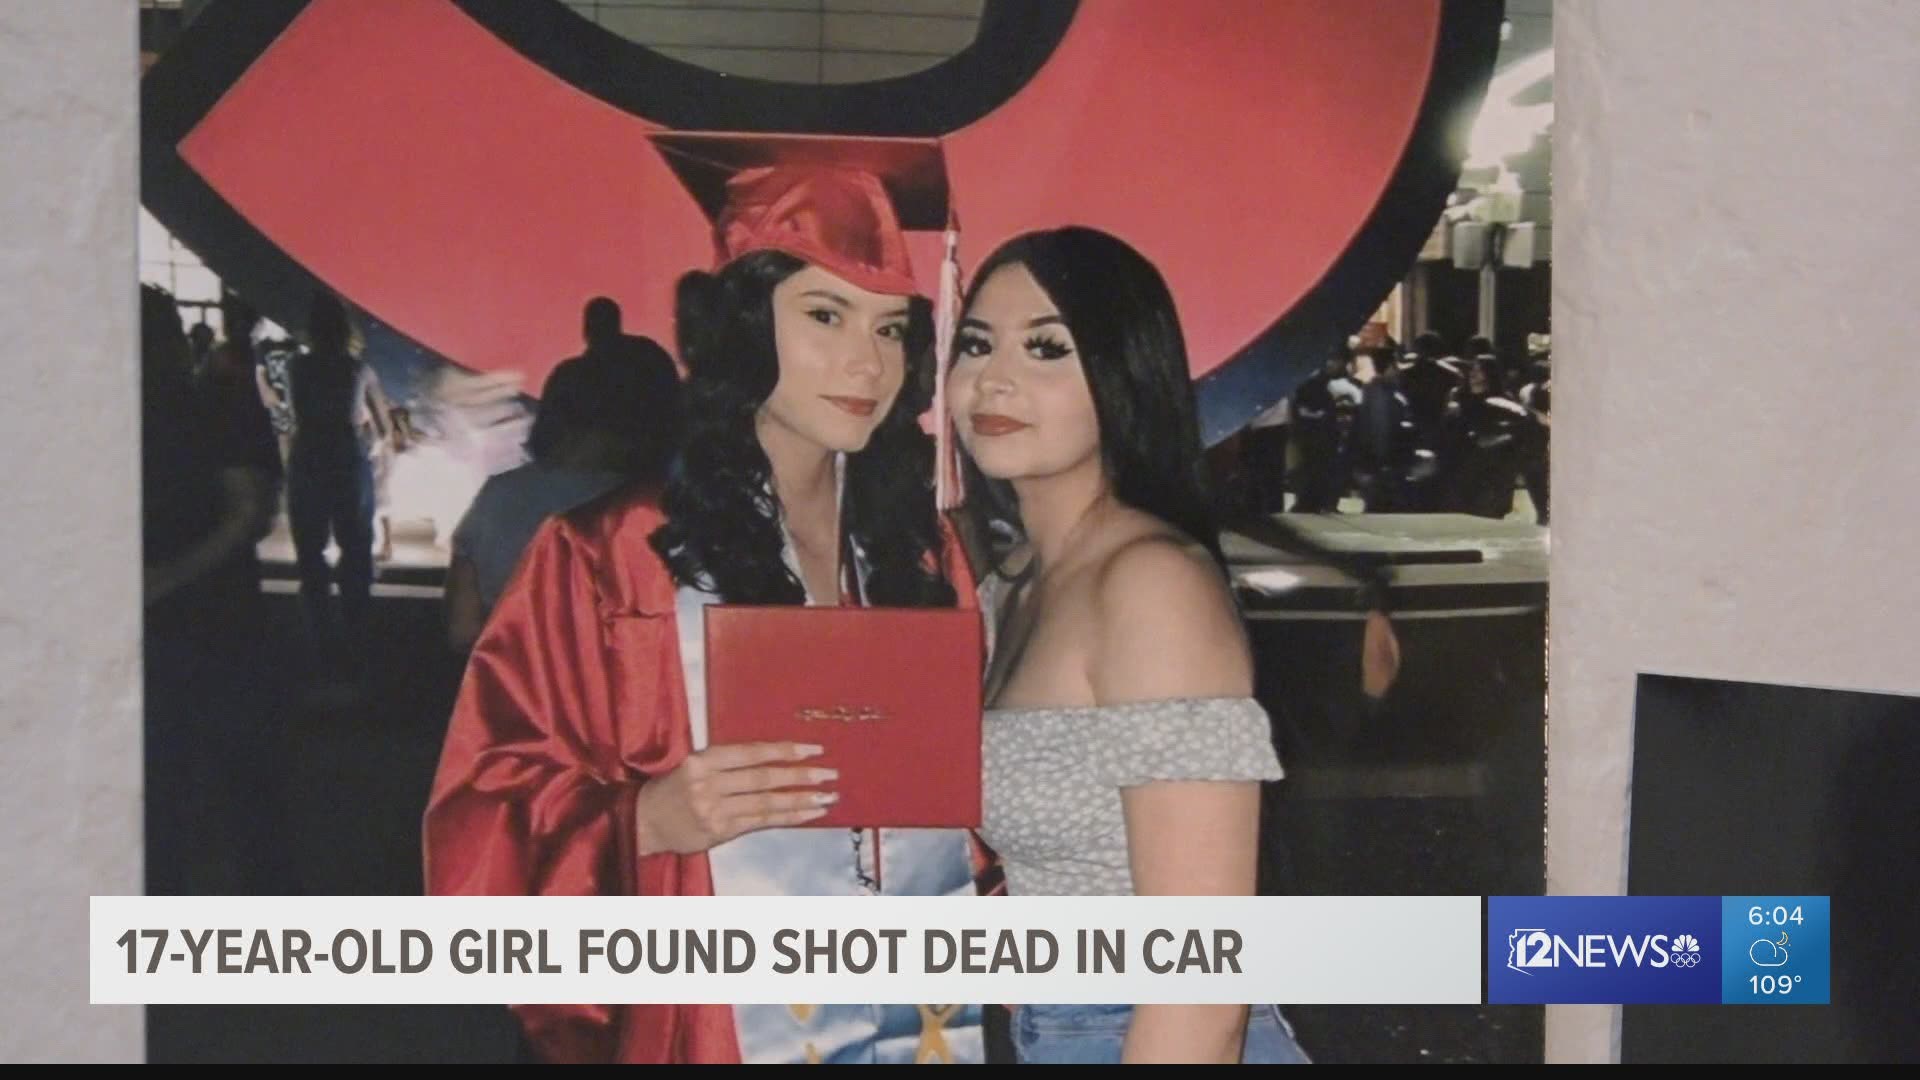 17-year-old Itzel Espinoza was found shot dead in the passenger seat of a car on July 3. Phoenix police say she was shot multiple times.